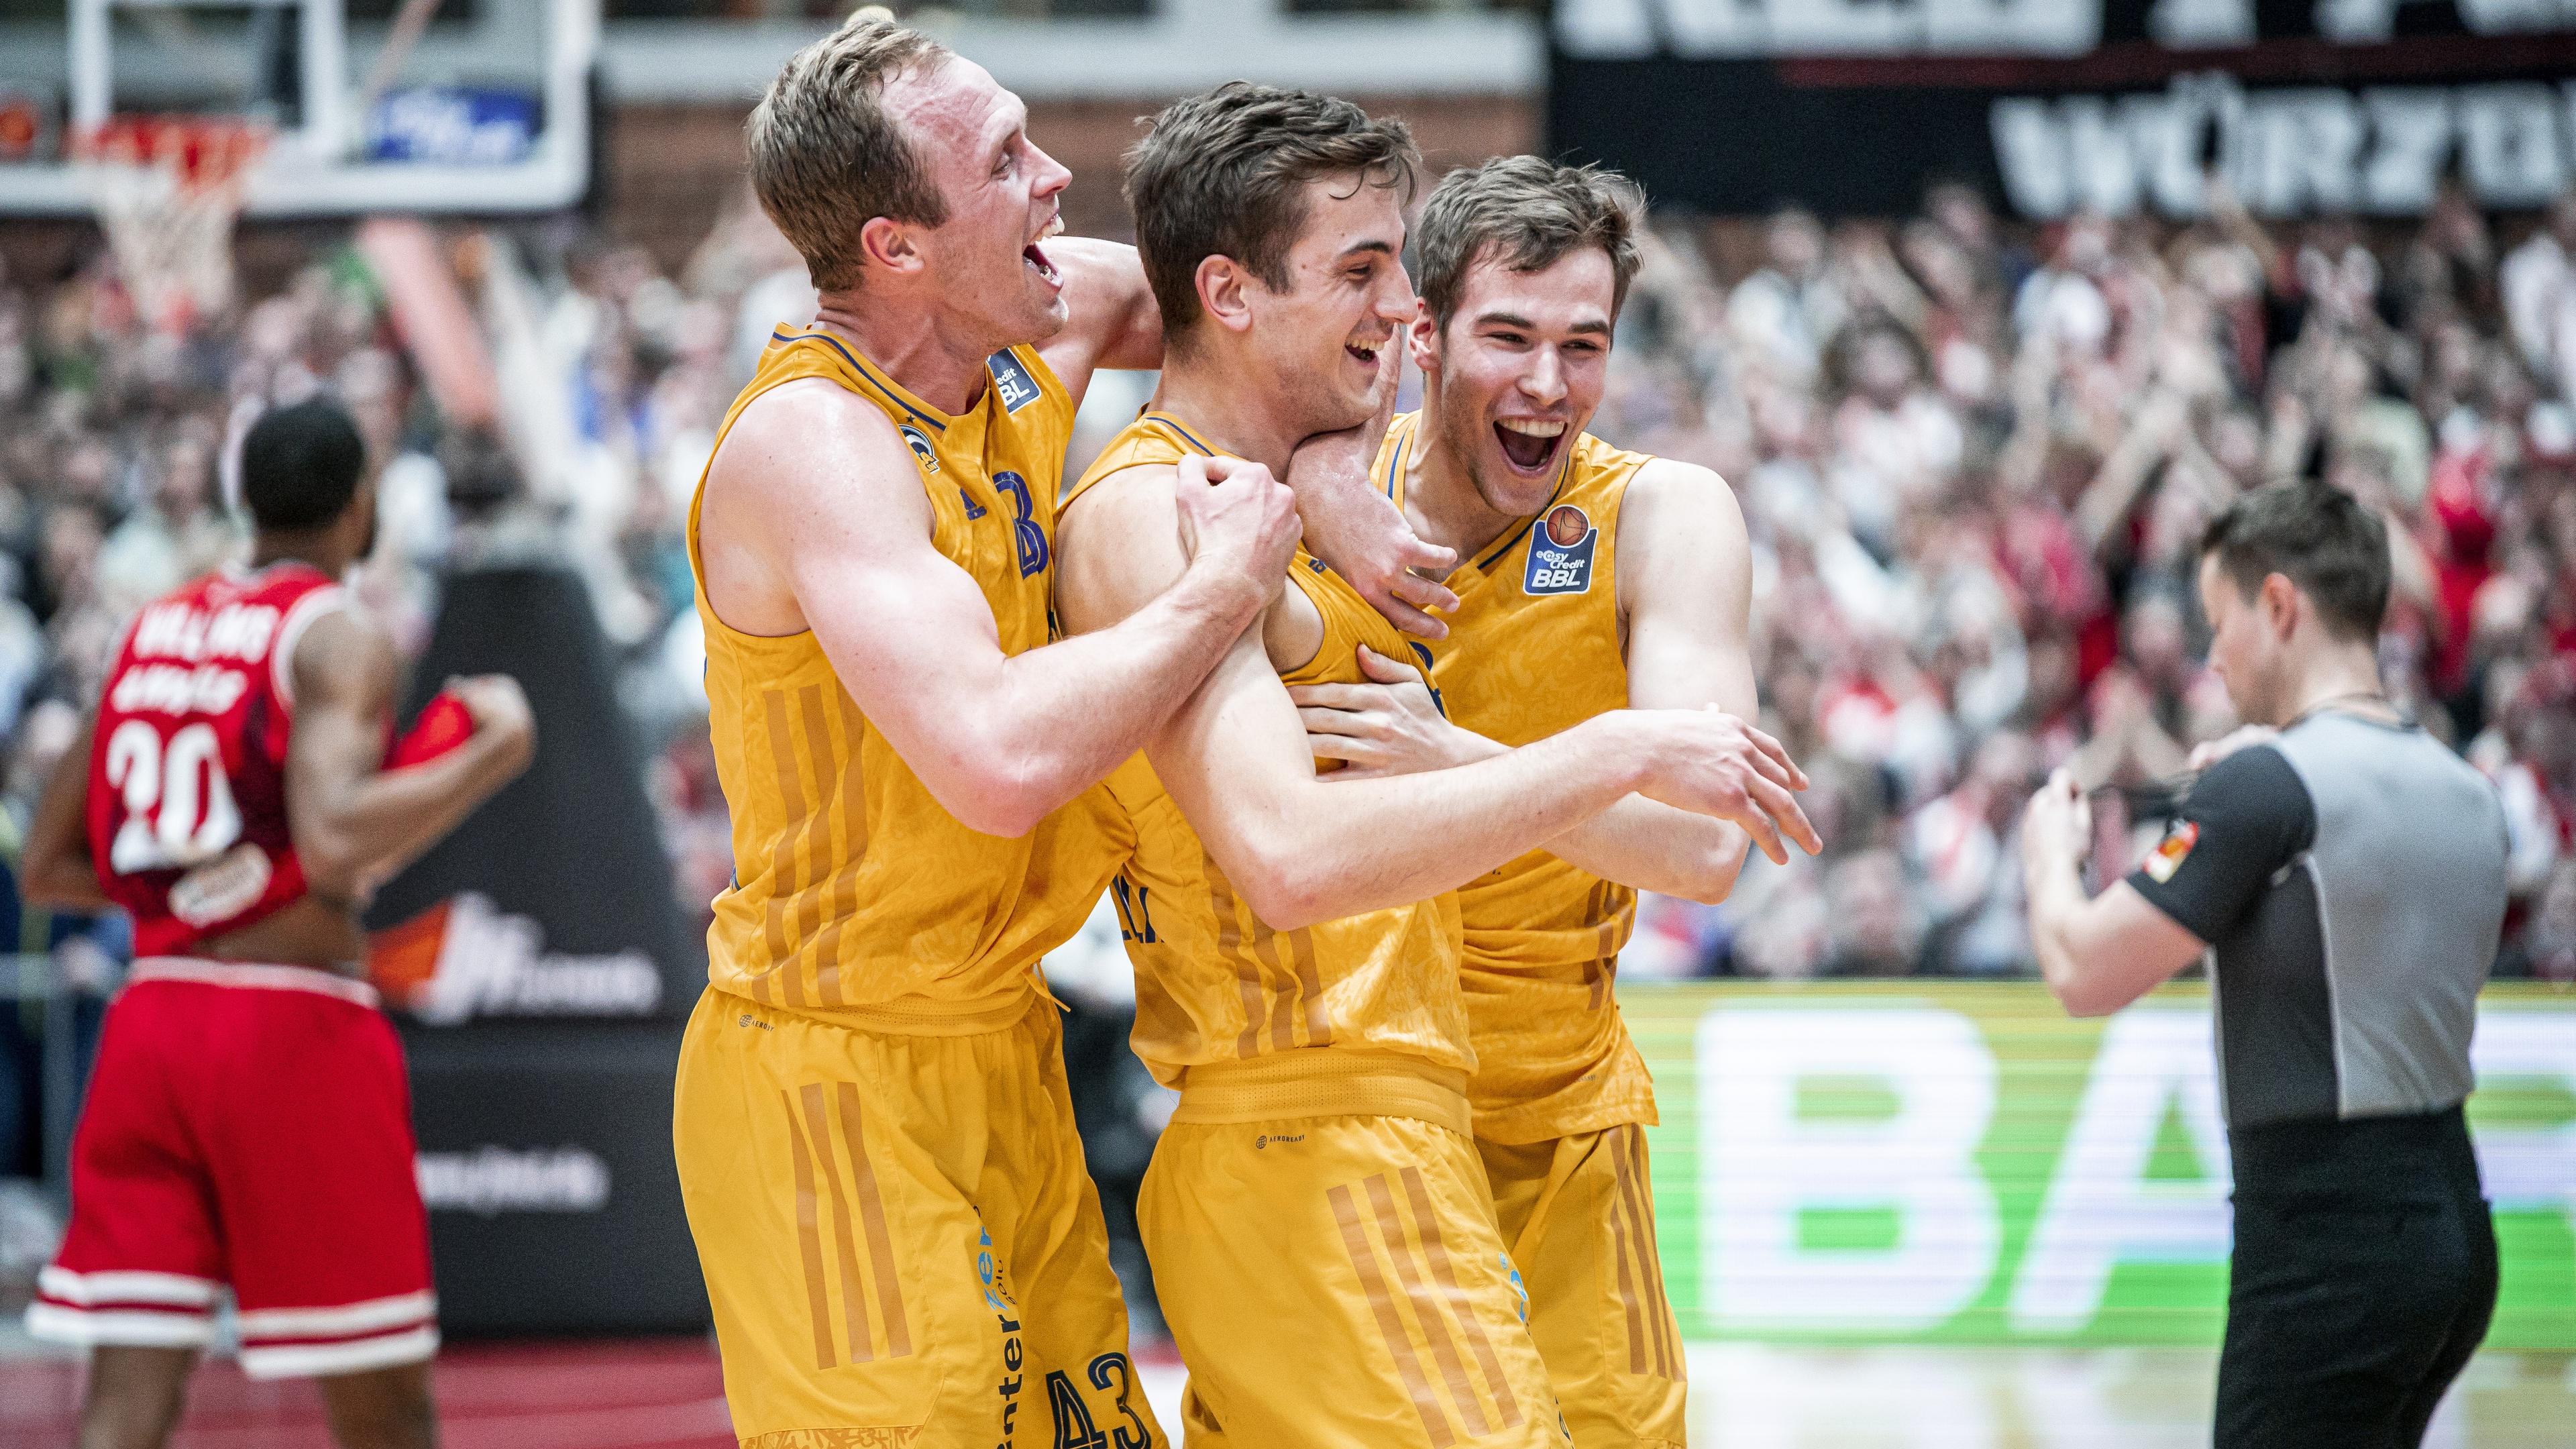 This week’s biggest storyline was Tim Schneider draining a three-pointer with 1.4 seconds left to give ALBA BERLIN a hard-fought victory at Würzburg Baskets and extend their winning streak to eight games. TJ Shorts made his own headlines as he poured in 30 points in a Telekom Baskets Bonn blowout of EWE Baskets Oldenburg. And what a week for Basketball Löwen Braunschweig, who ended their months of misery with two victories to snap a nine-game losing streak and now move out of last place.